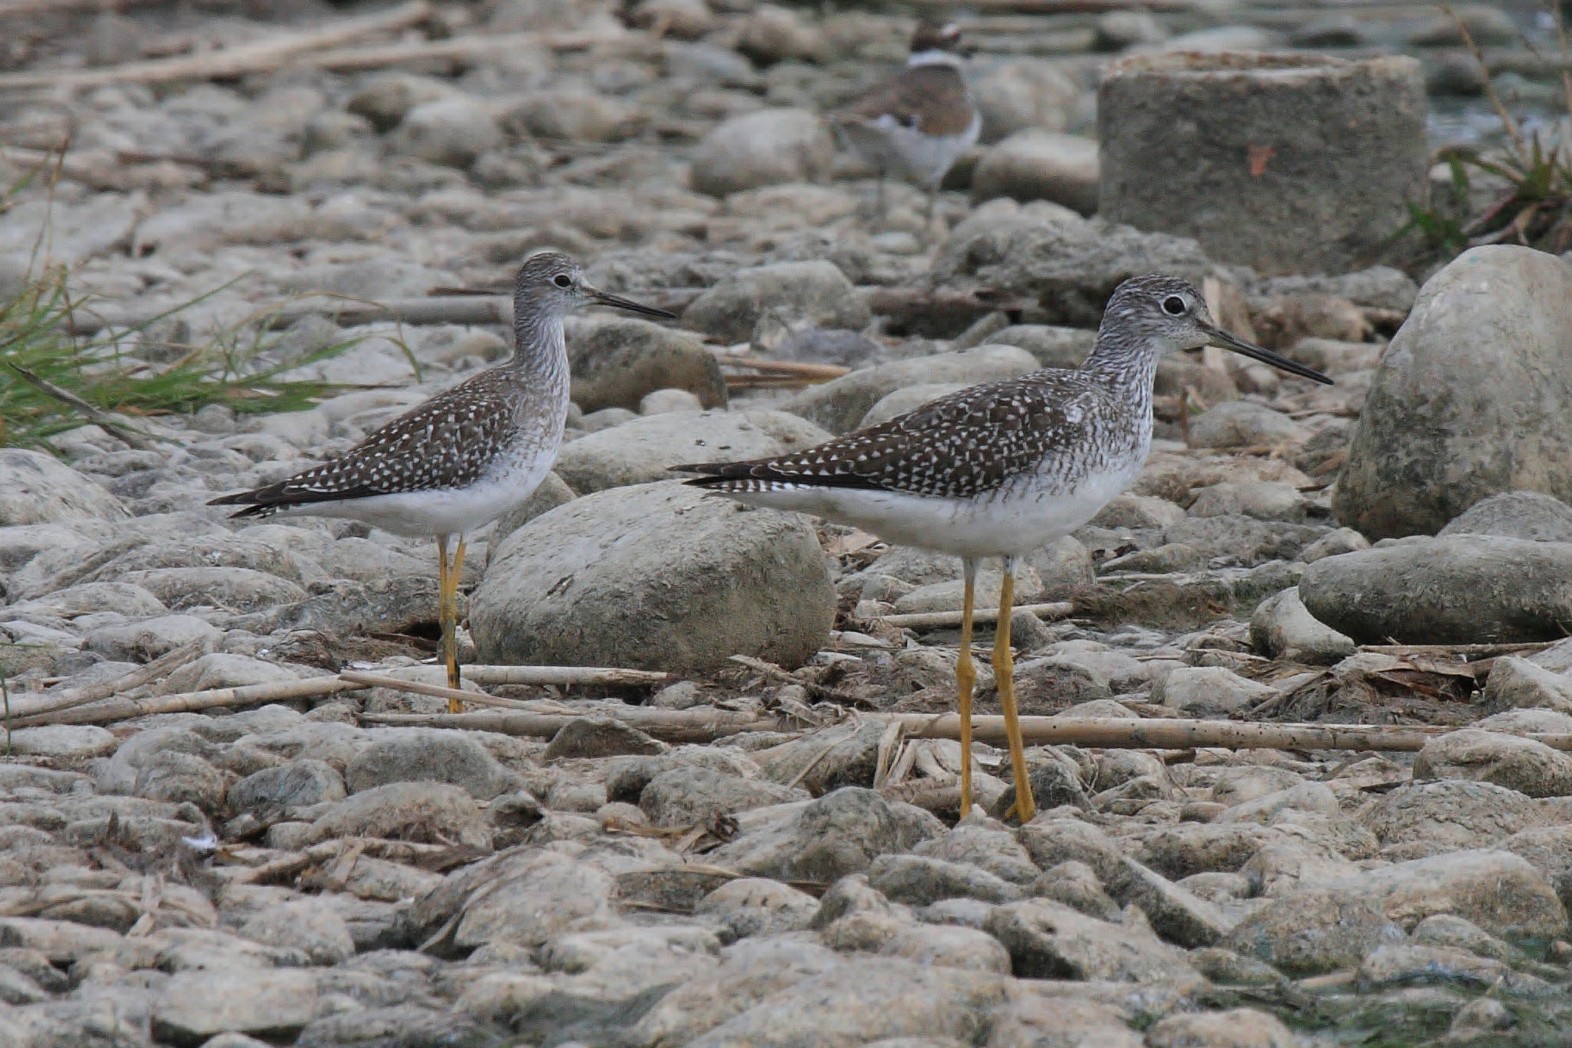 Greater Yellowlegs and Lesser Yellowlegs, side-by-side. Which is which? Photo by Dominic Sherony (CC BY-SA 2.0), via Wikimedia Commons.